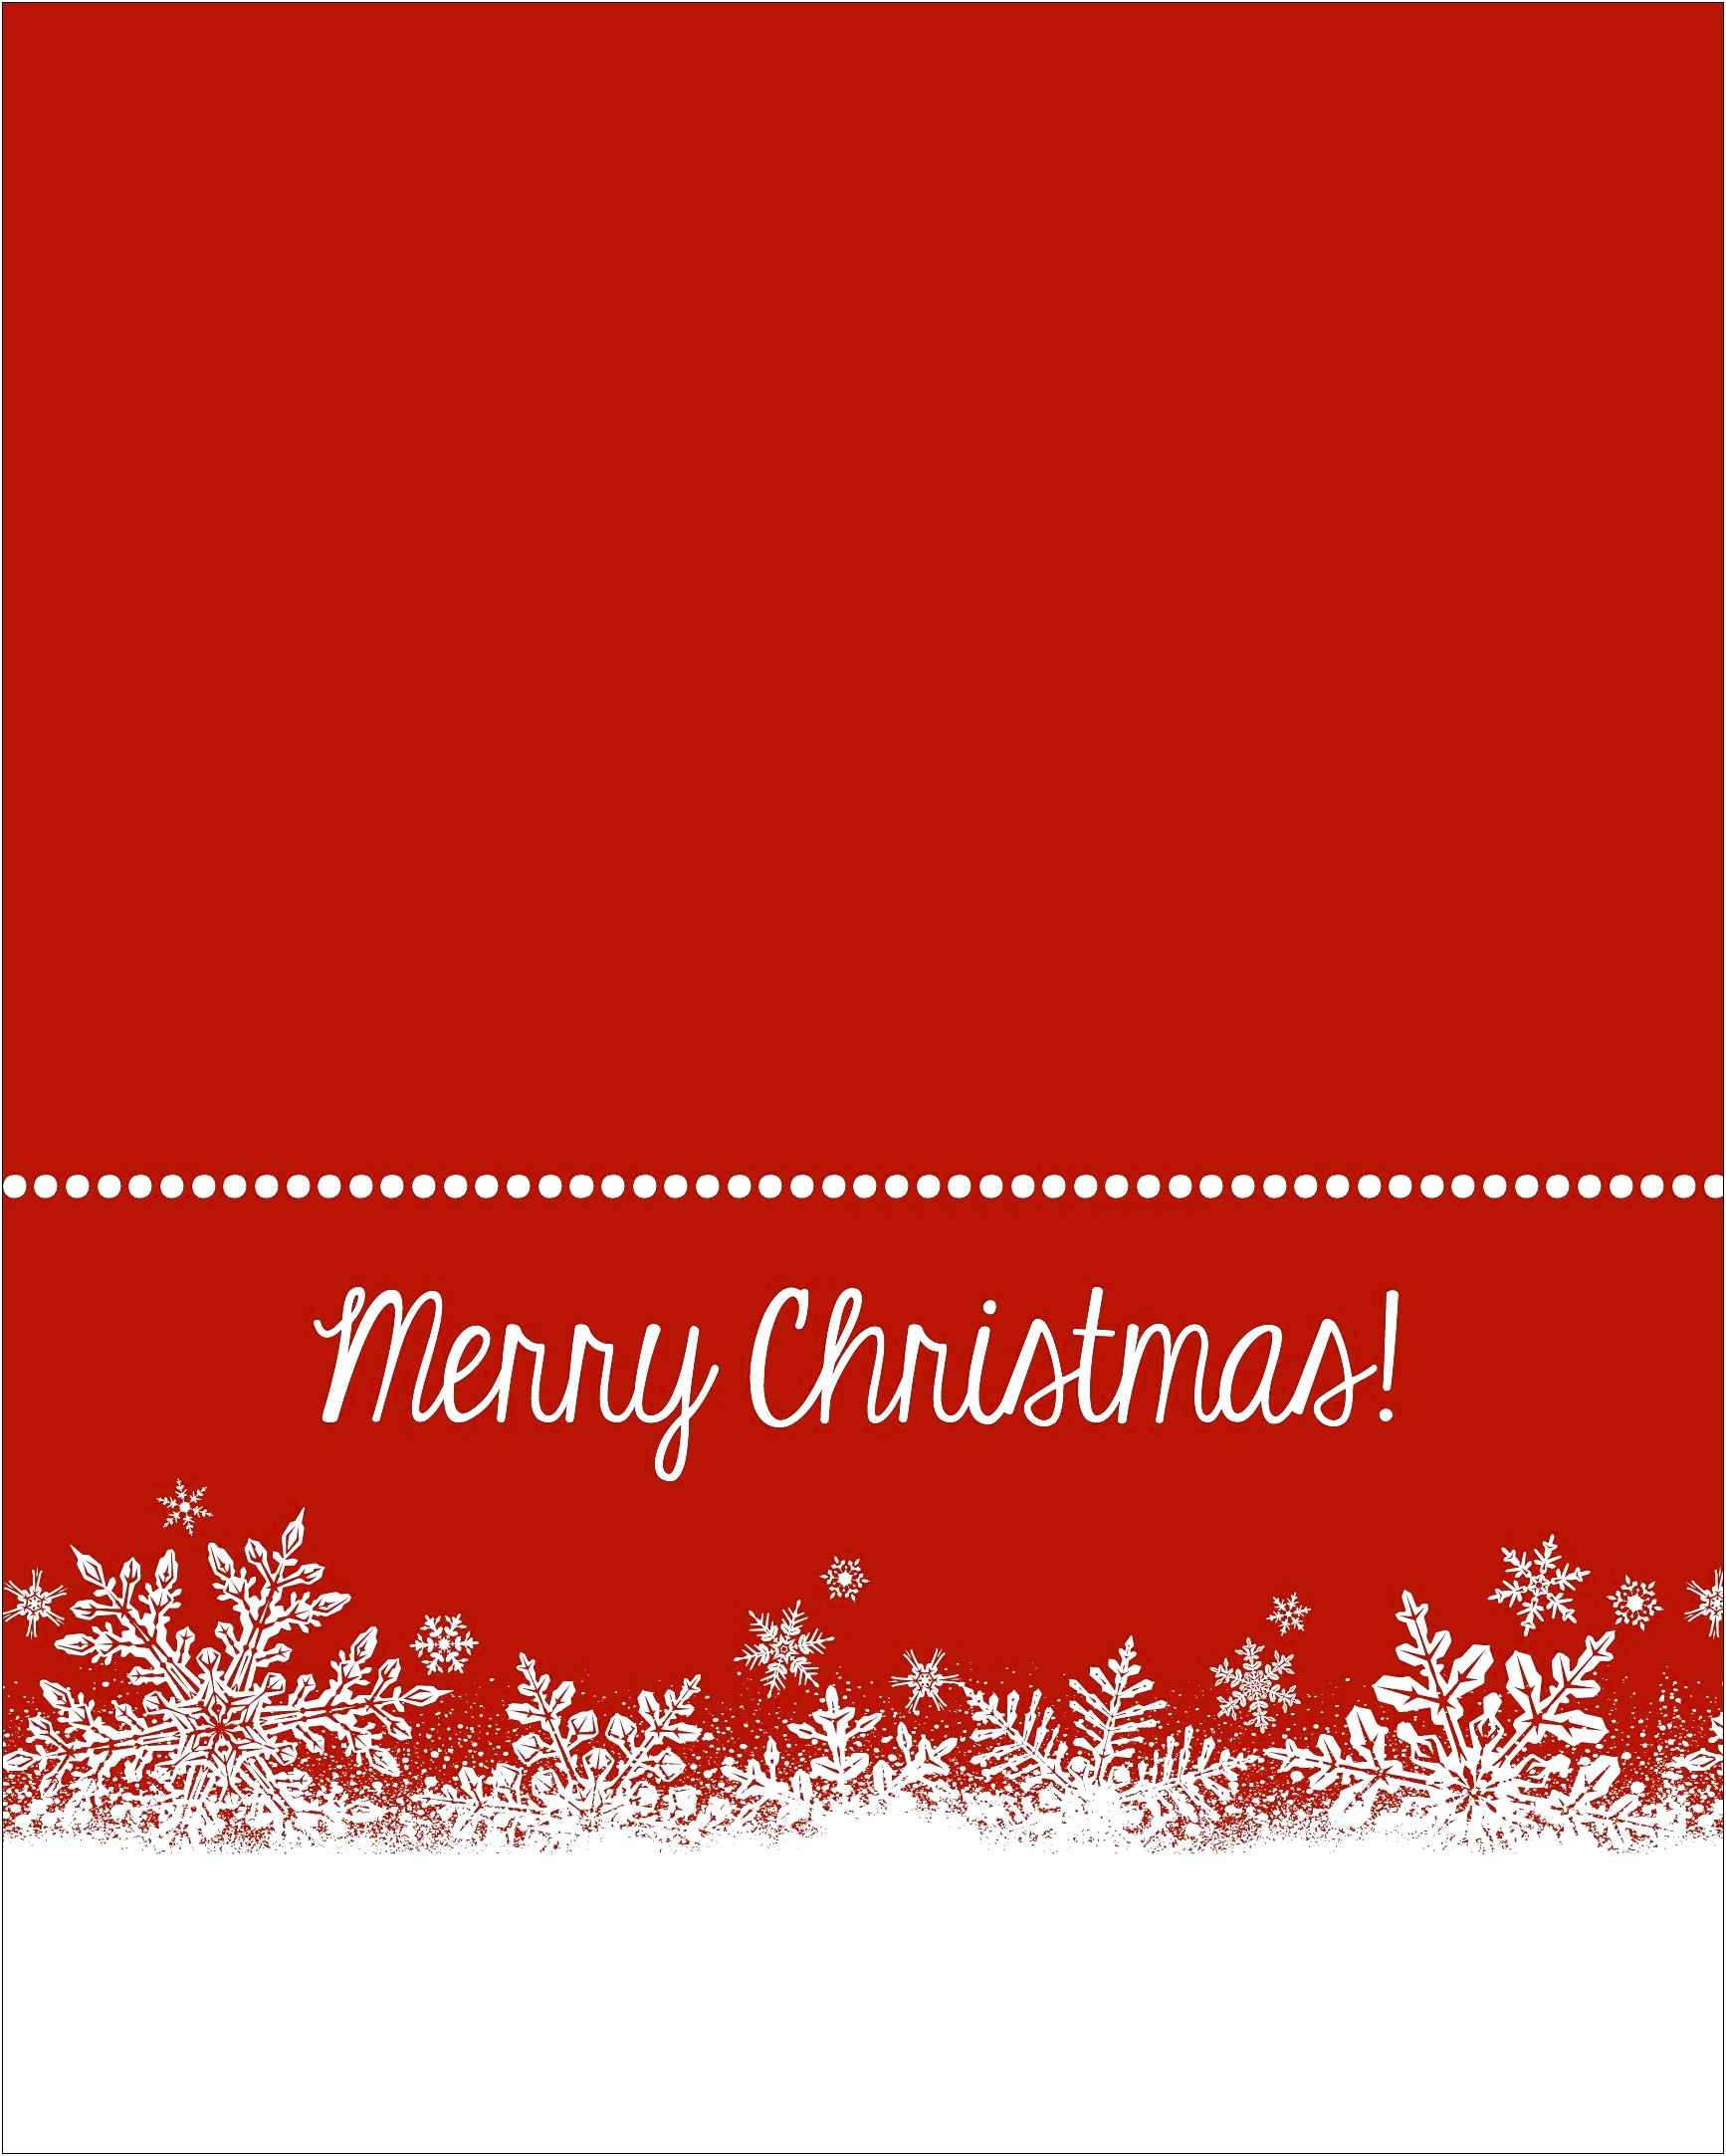 Free Christmas Card Design Download Templates